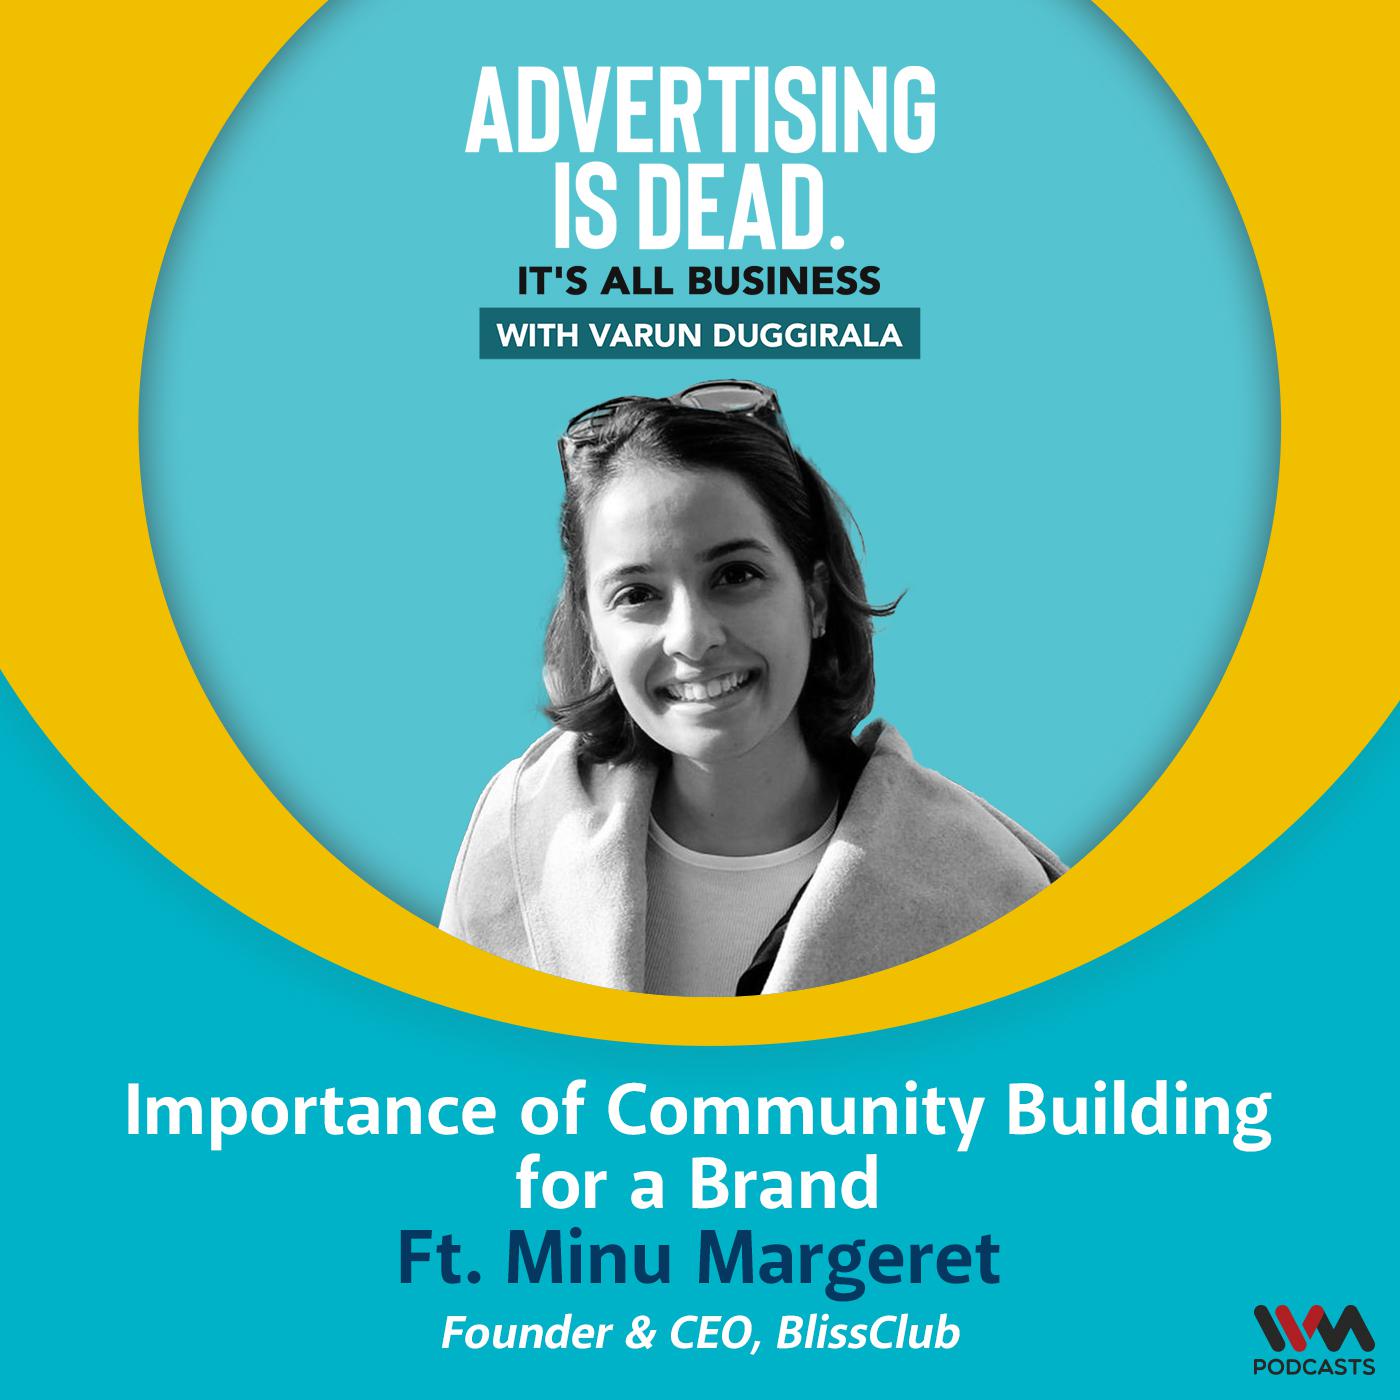 Minu Margeret on the Importance of Community Building for a Brand